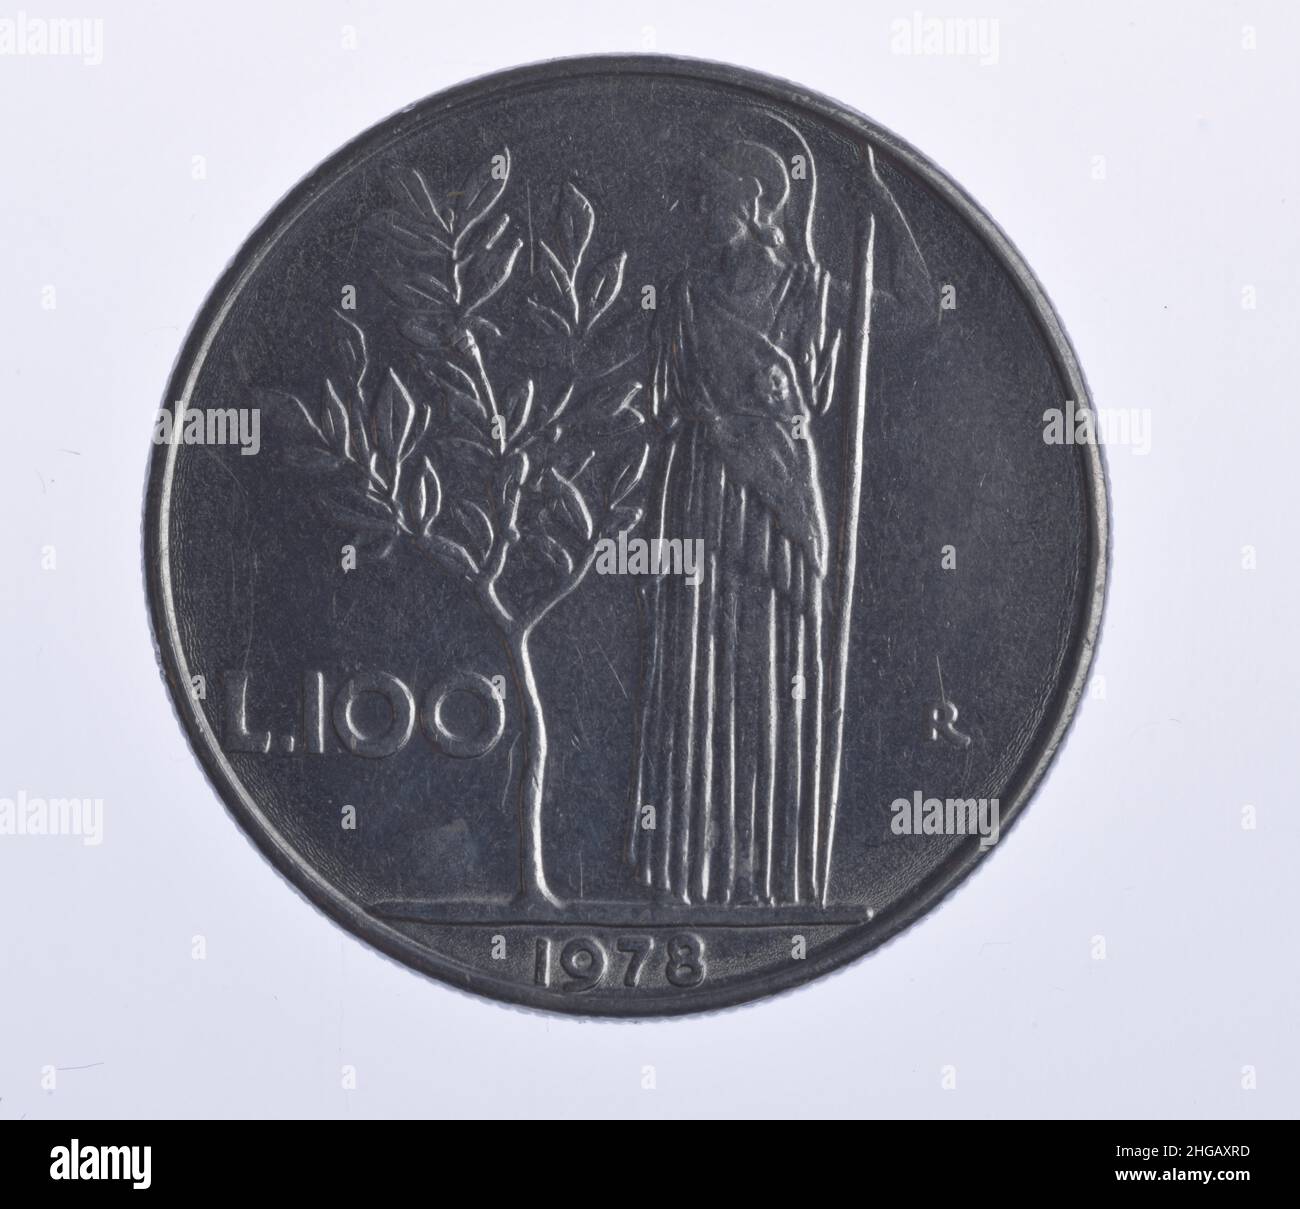 100 Lire High Resolution Stock Photography and Images - Alamy